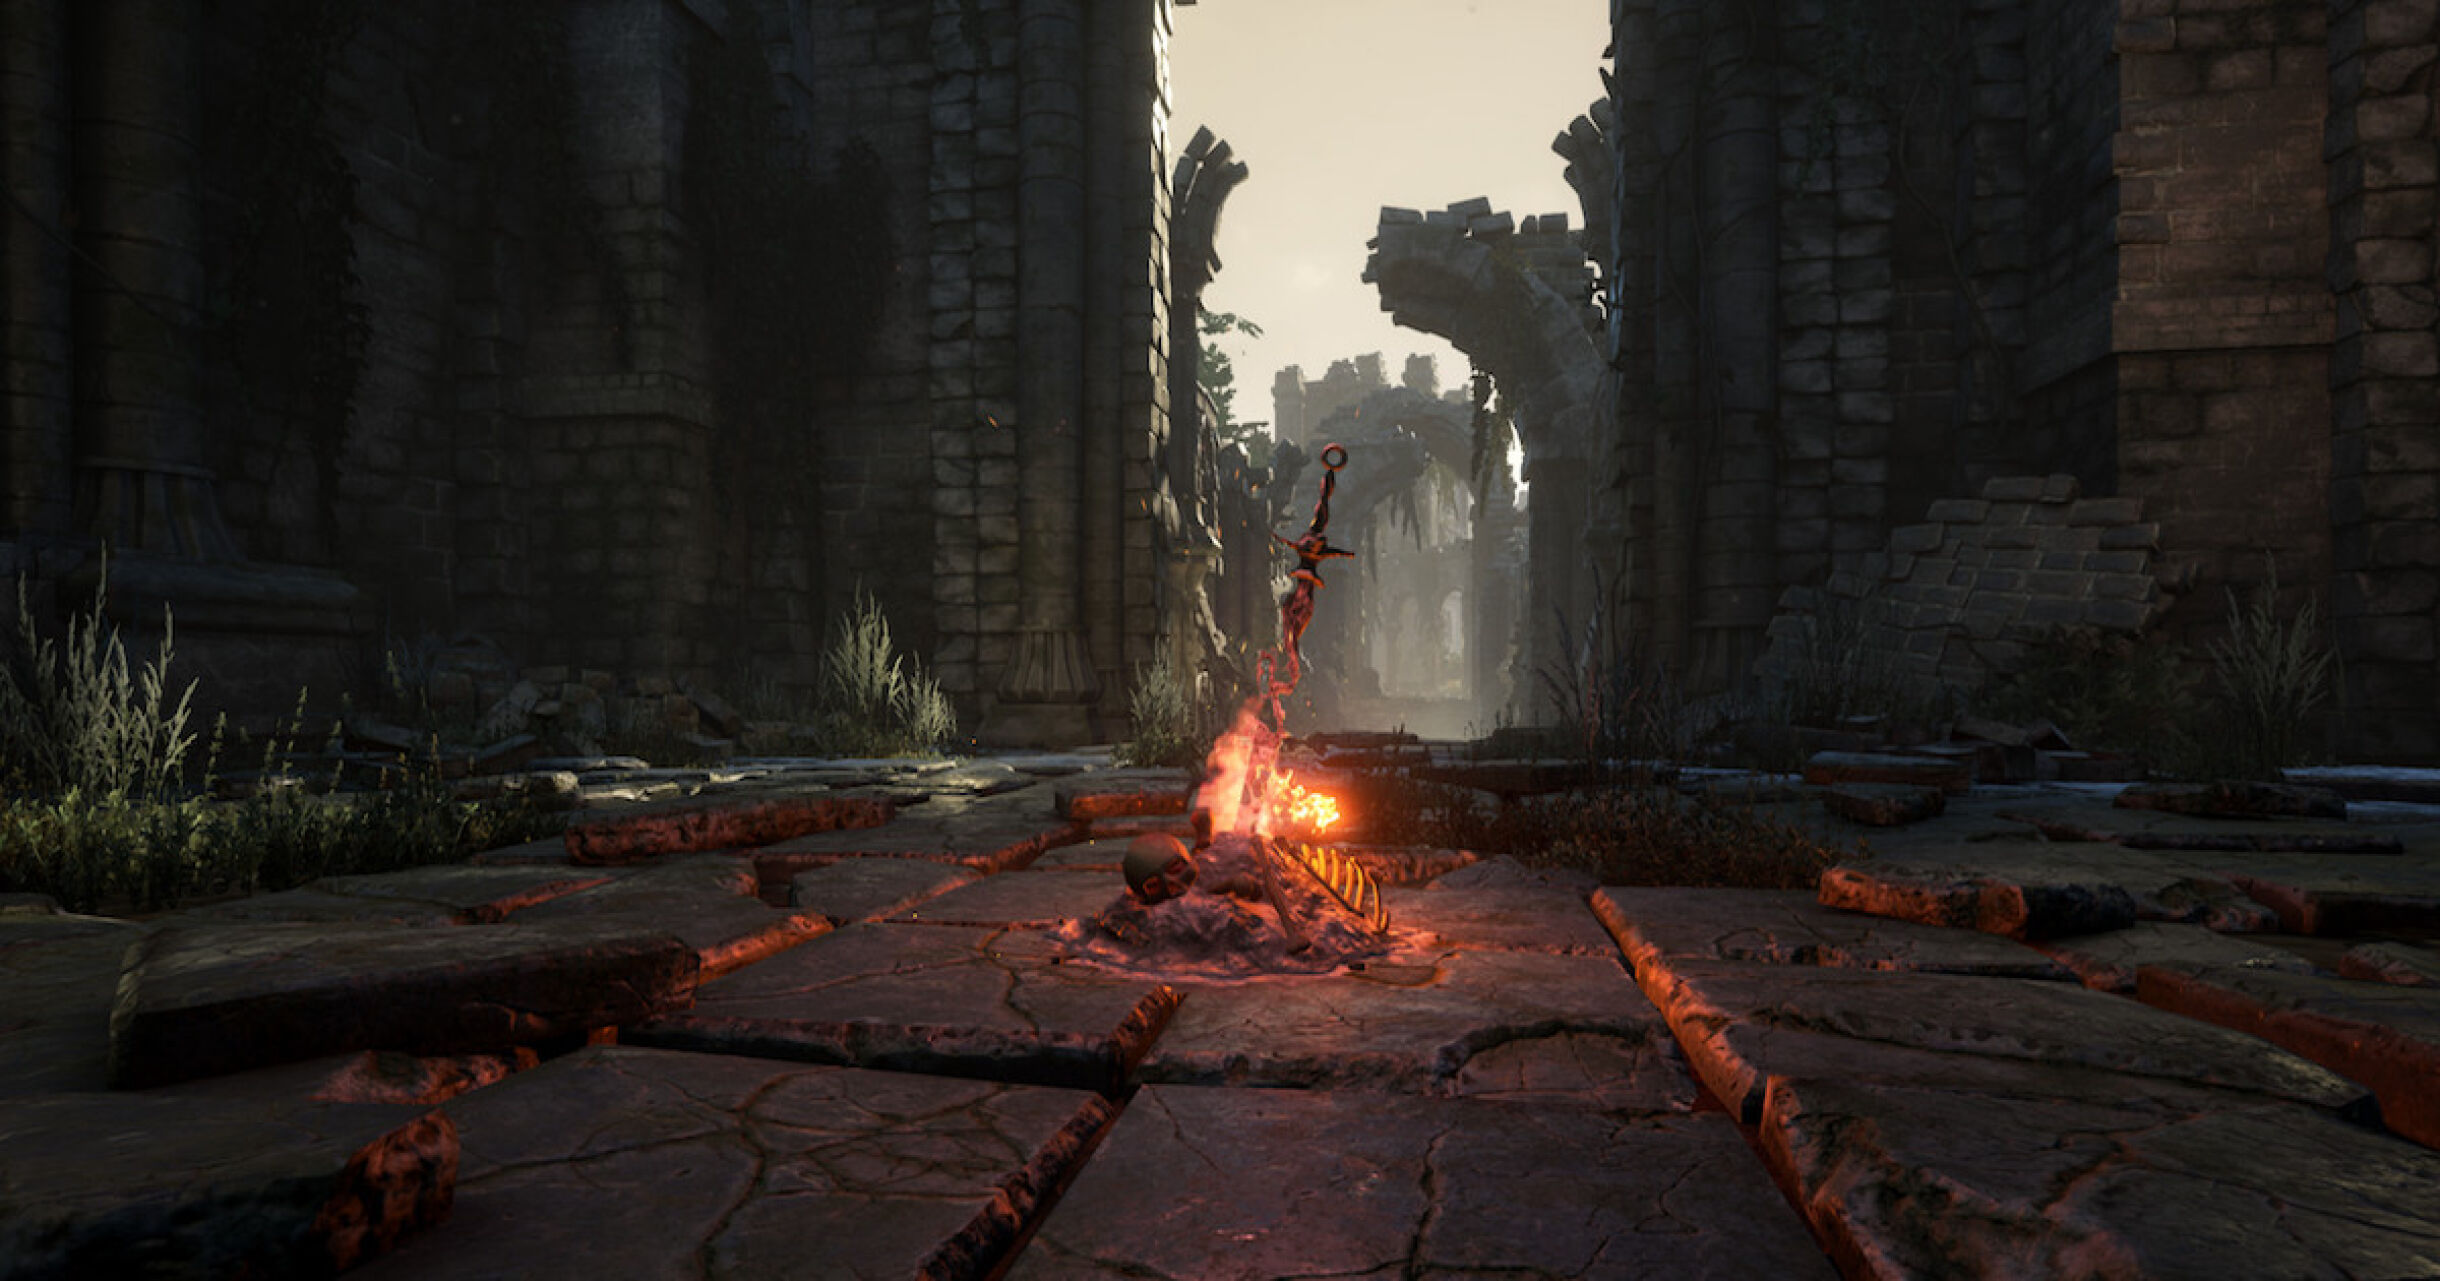 FromSoftware learning Unreal Engine, will return to games we're